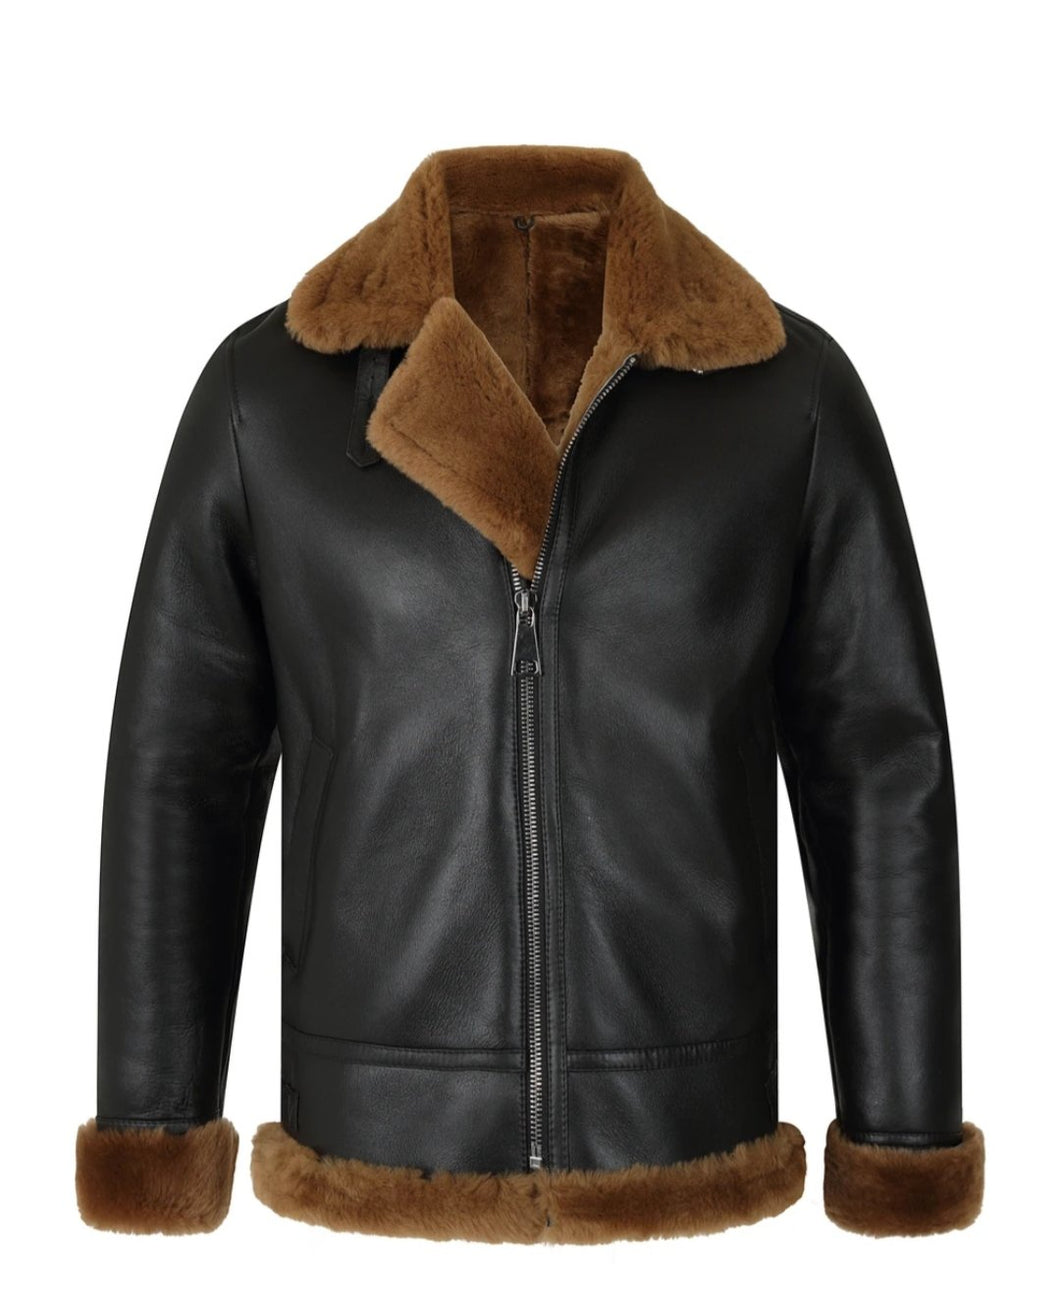 Classic Ginger Brown B3 Bomber Aviator Shearling Jacket - Shearling leather